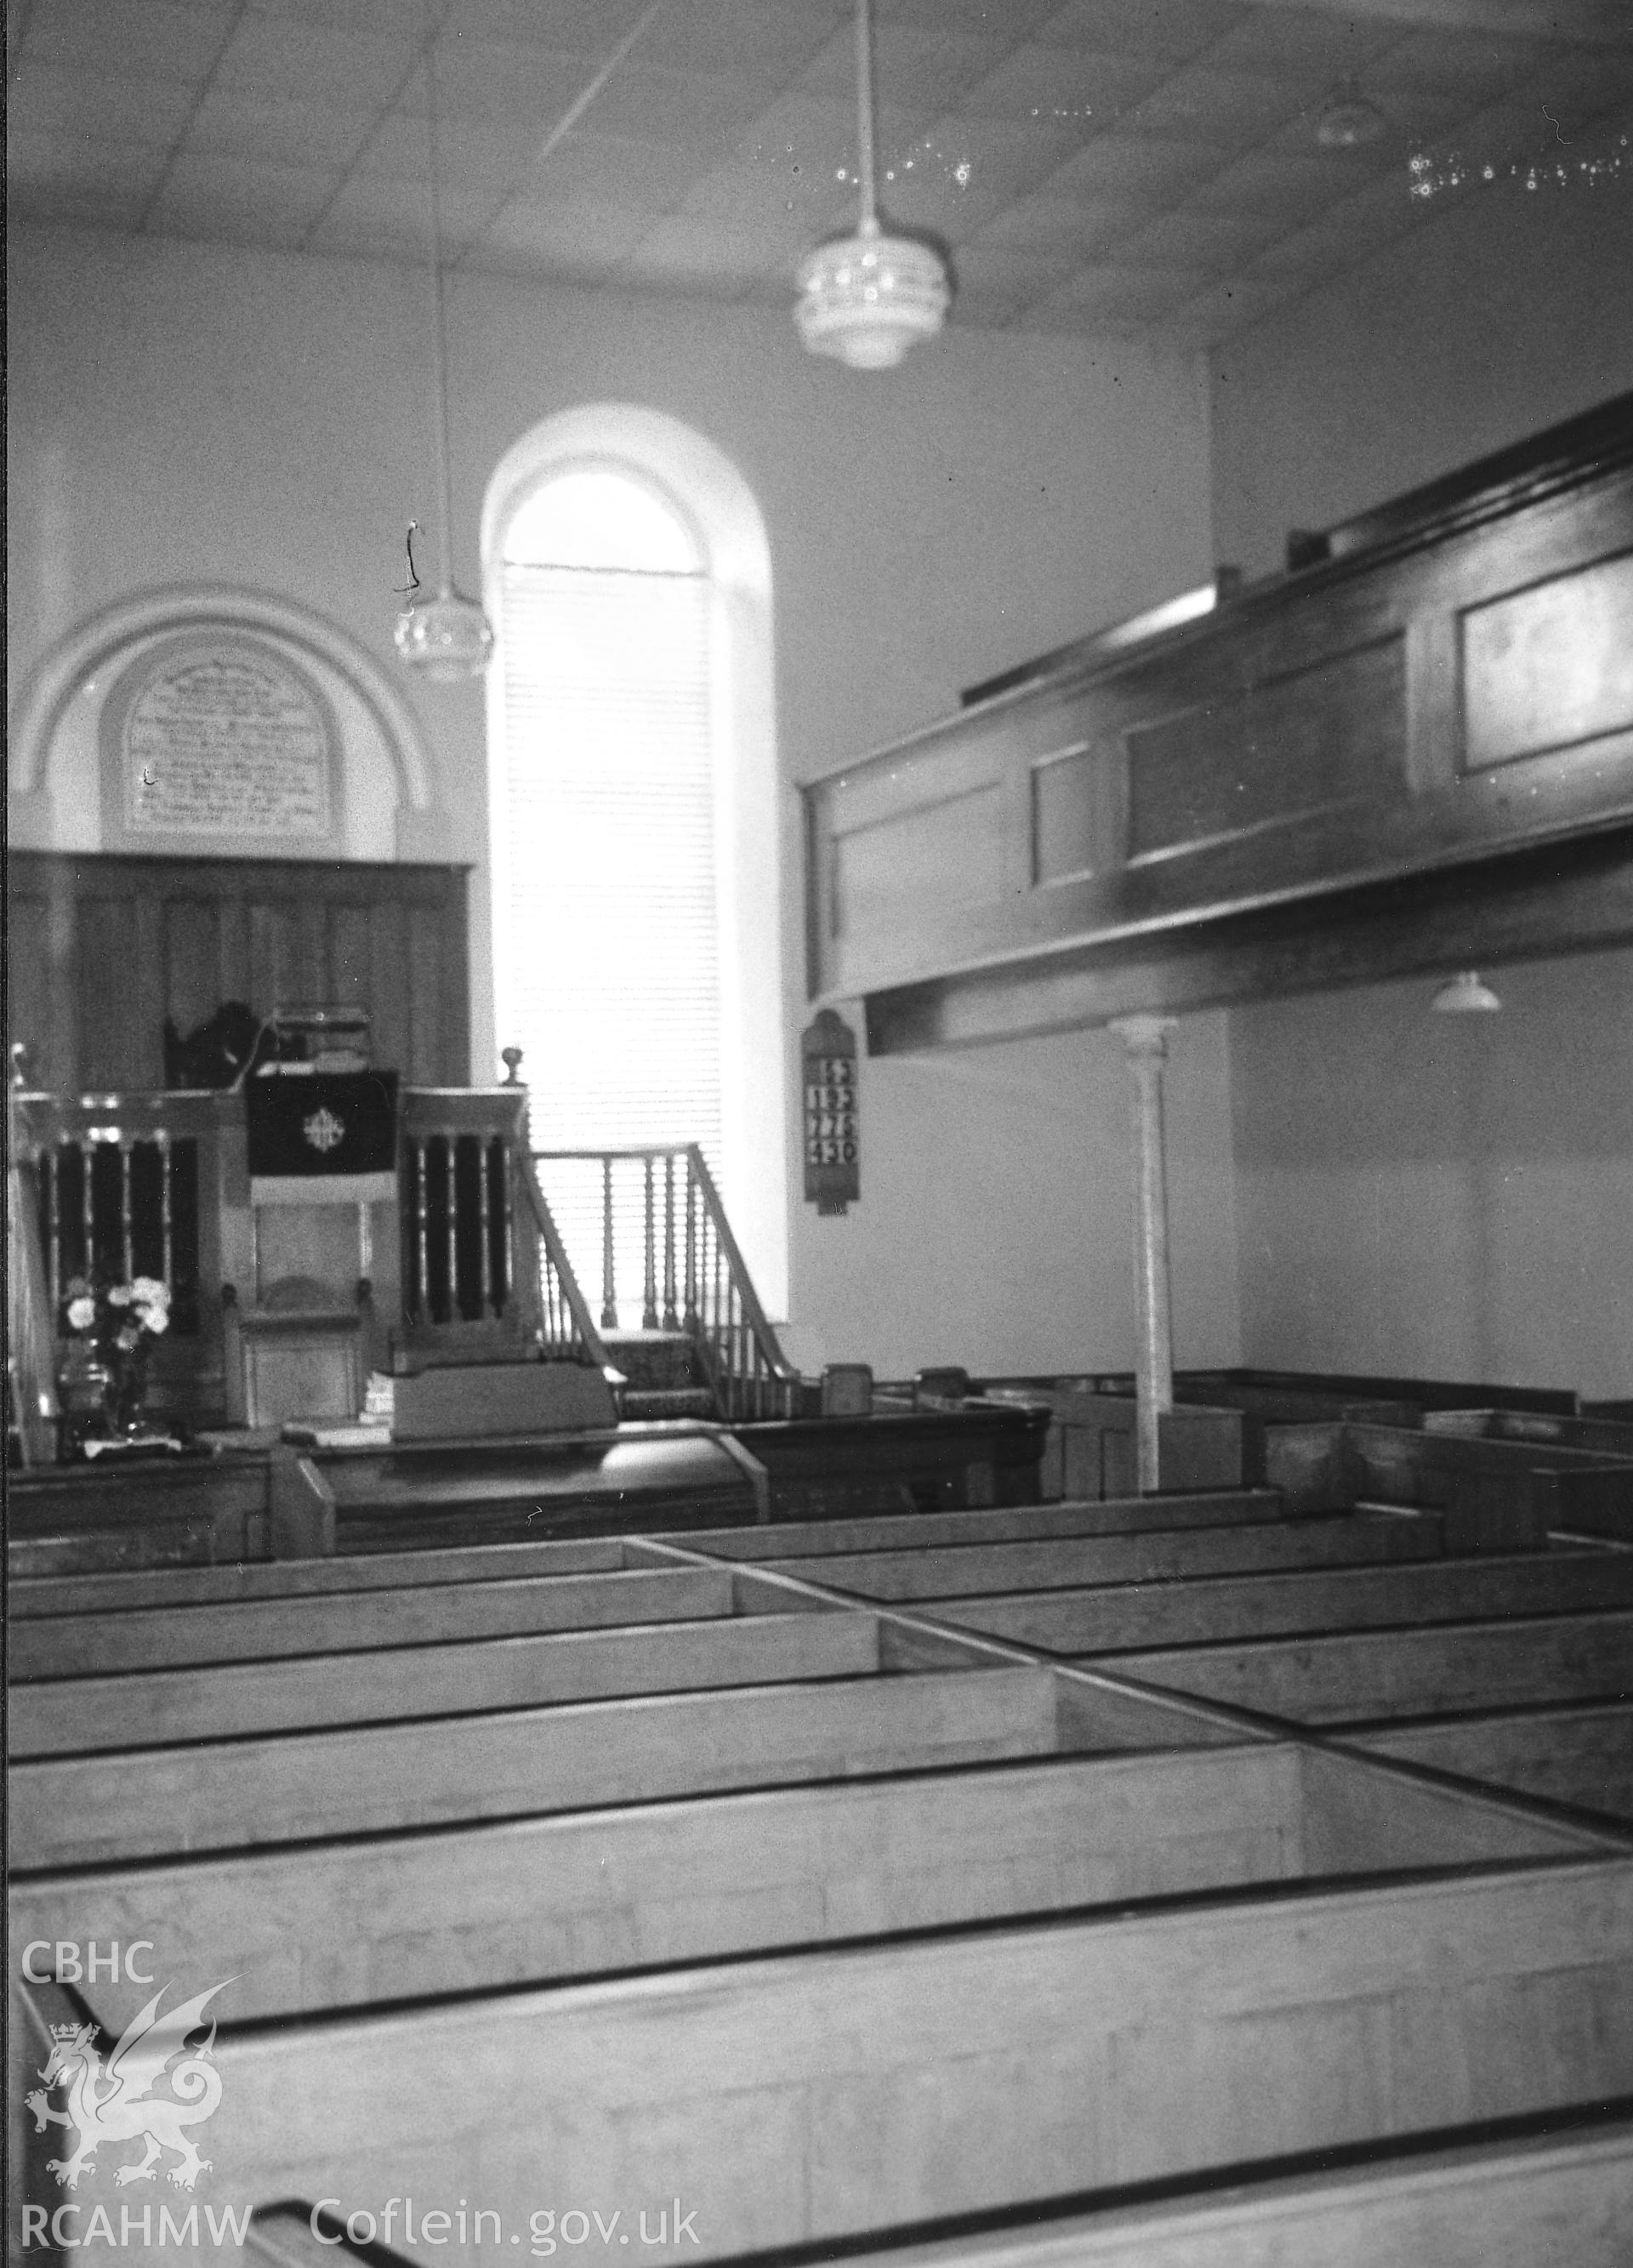 Digital copy of a black and white photograph showing an interior view of Pisgah Independent Chapel, taken by Robert Scourfield, 1995.